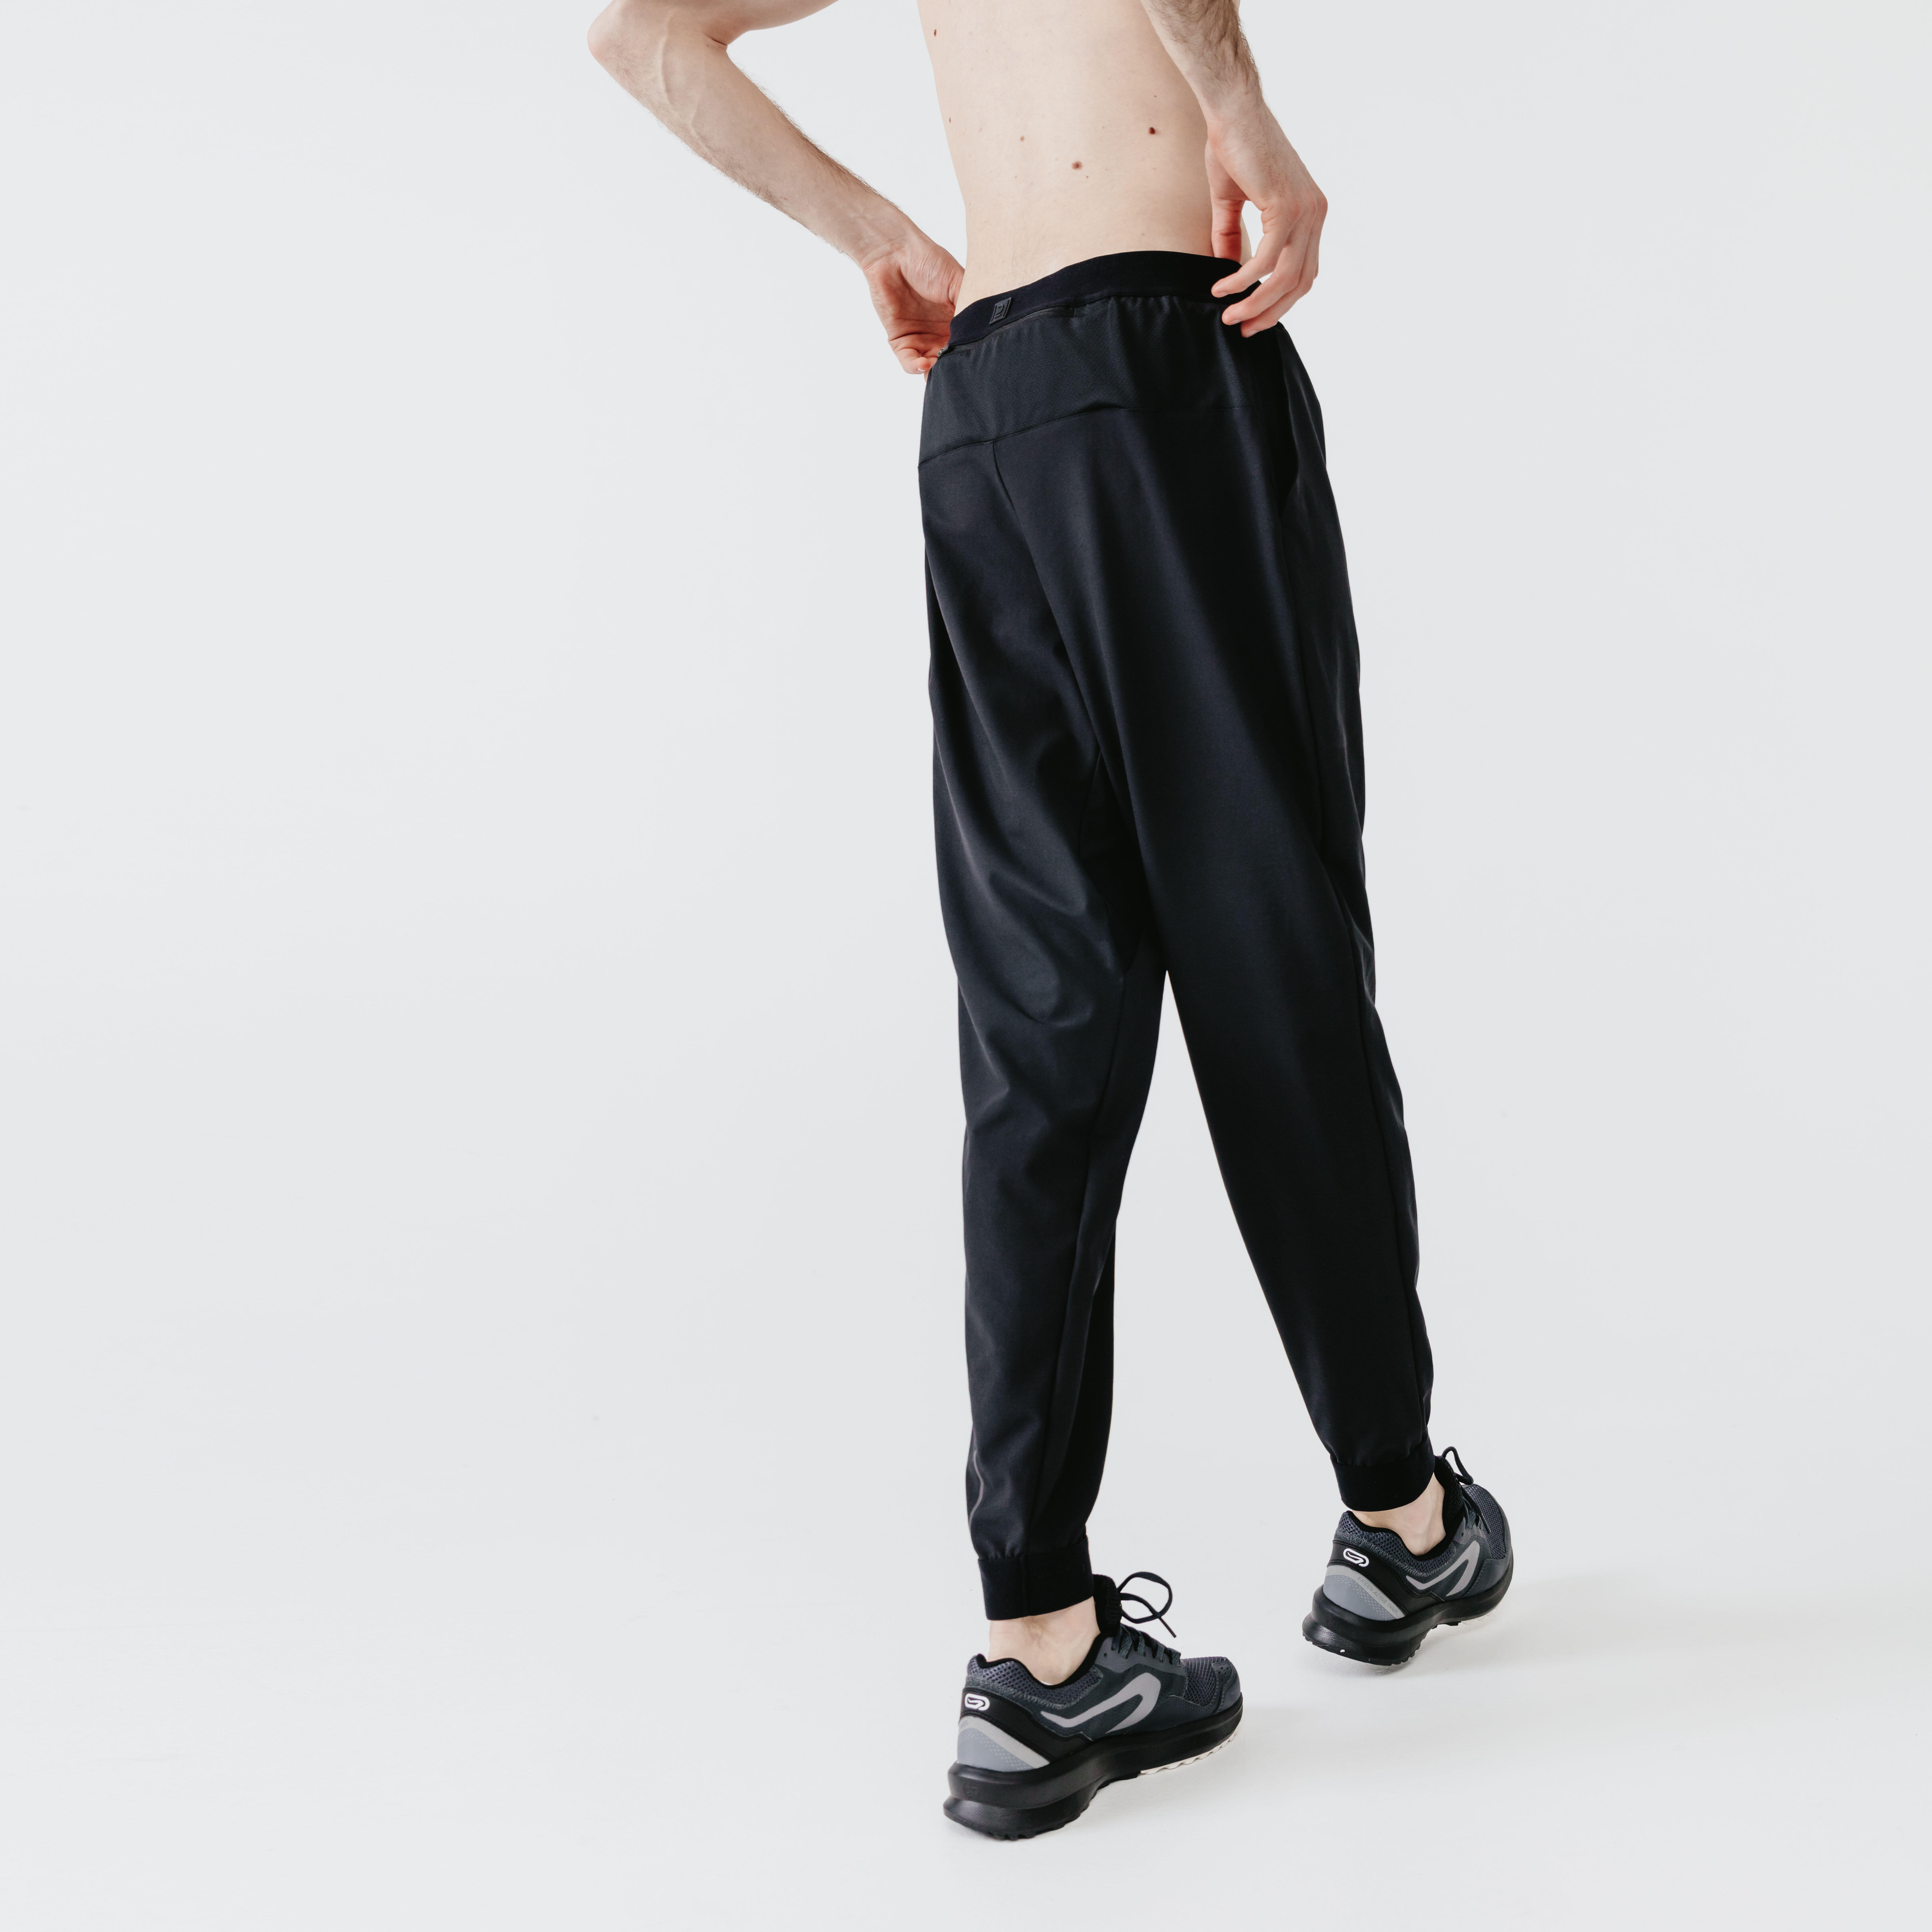 36 Best Sports Trousers ideas  sports trousers mens pants trousers